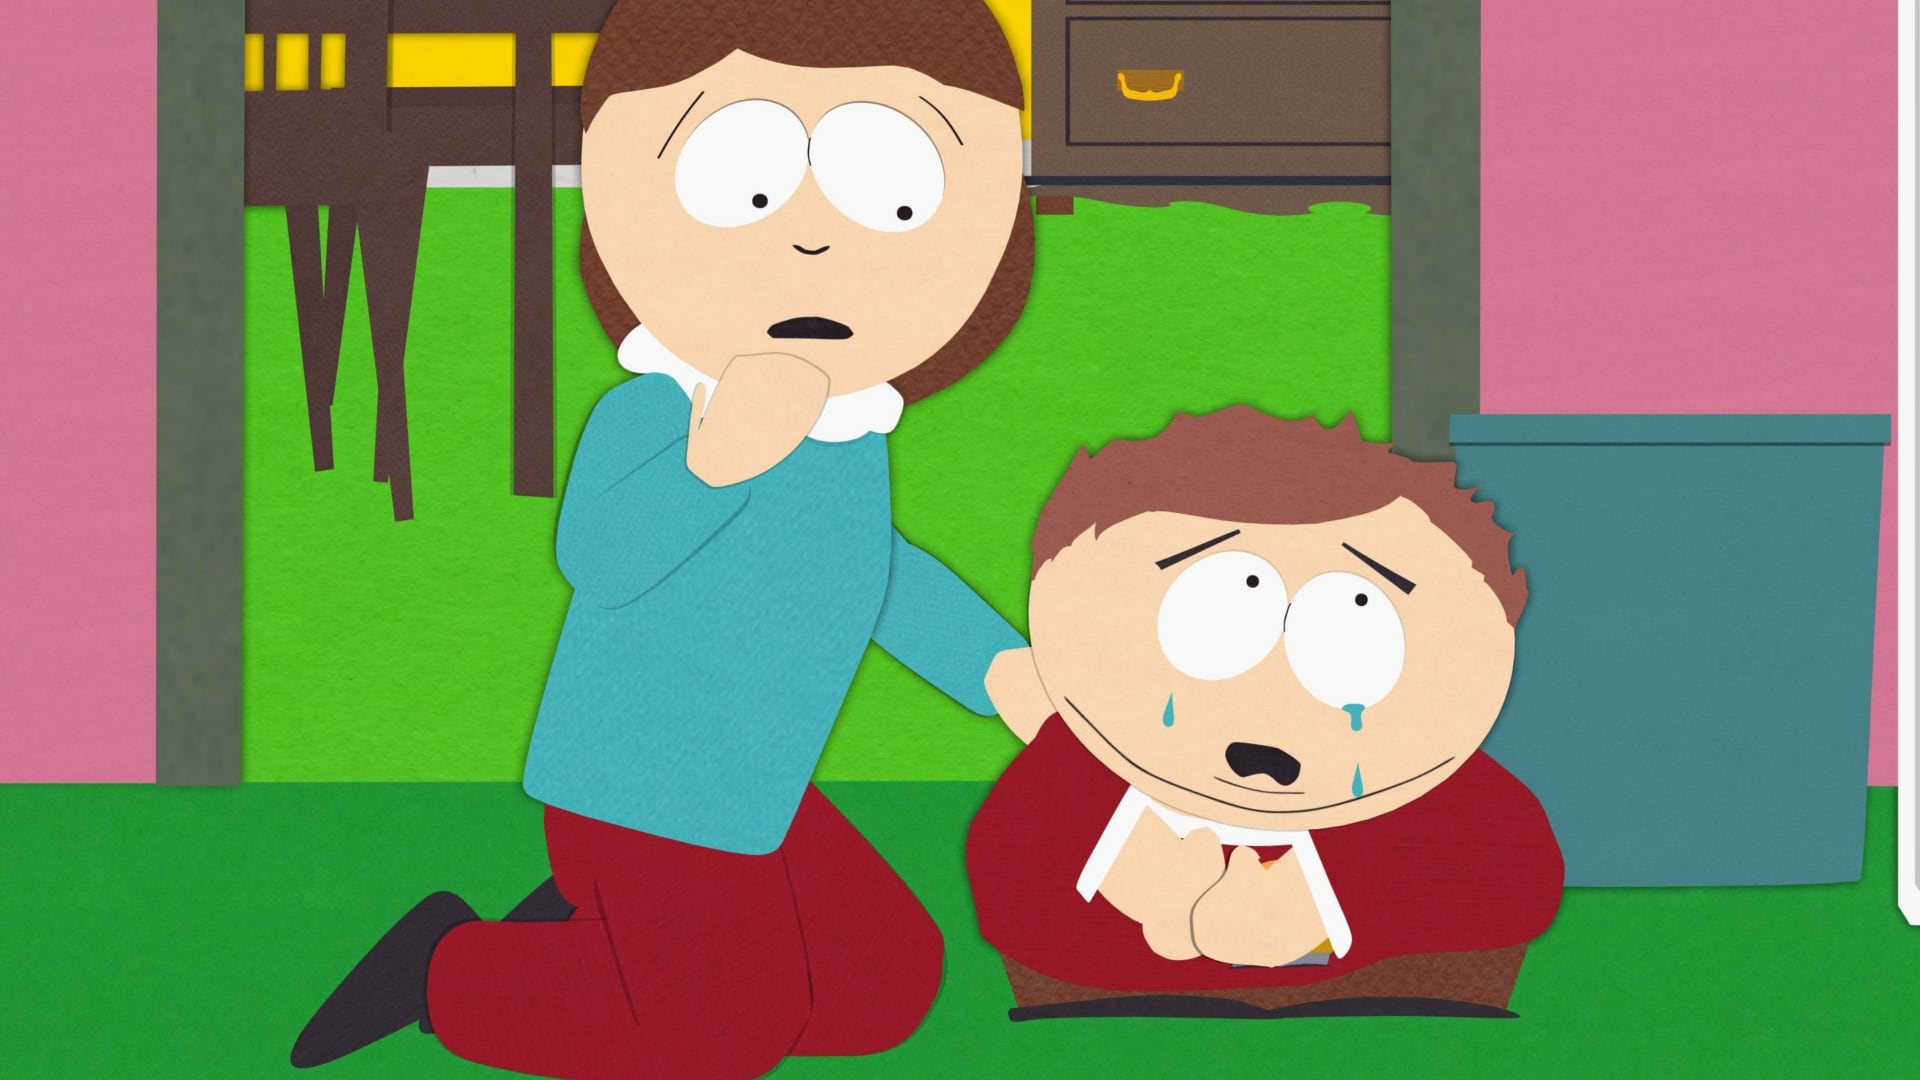 Butters' dad sends him off to special camp to "Pray the Gay Away&...